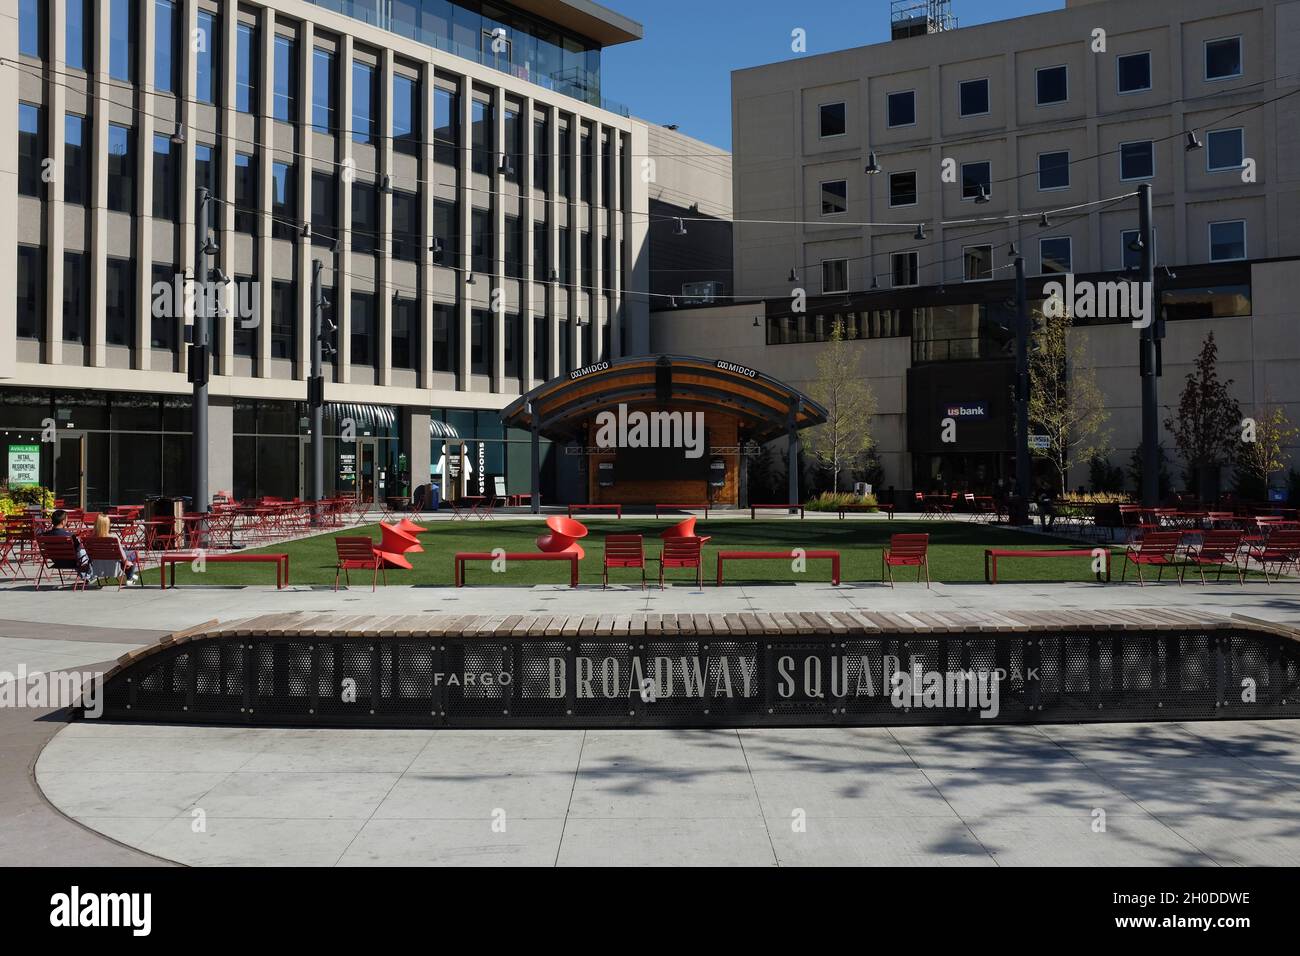 FARGO, NORTH DAKOTA - 4 OCT 2021: Broadway Square is a half-acre of community gathering space for the public, located at the corner of Broadway and 2n Stock Photo